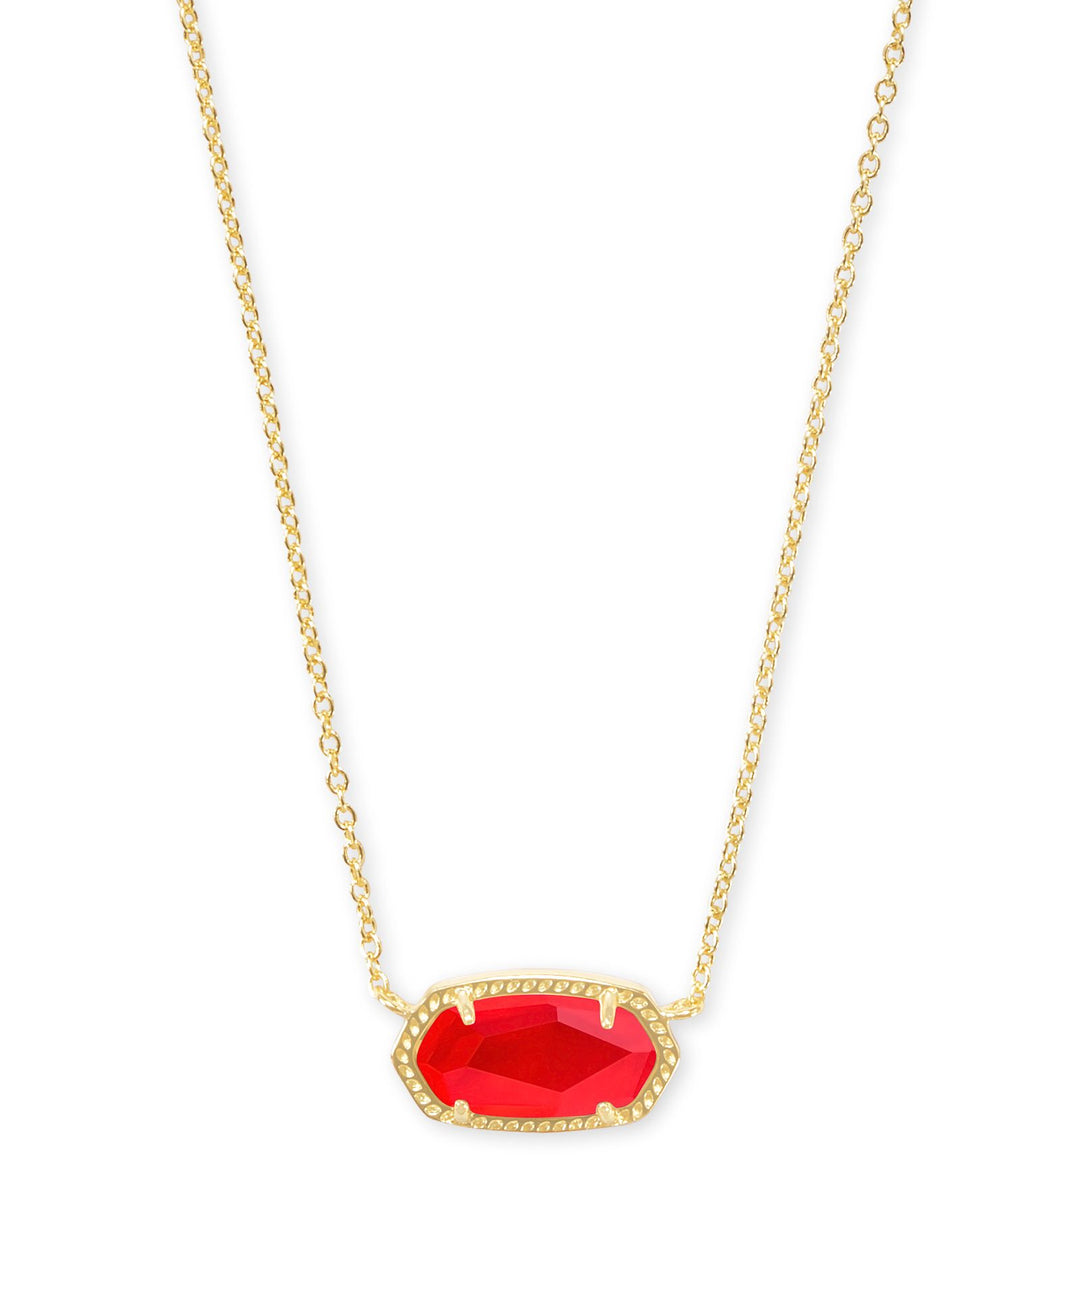 Kendra Scott Elisa Gold Pendant Necklace in Red Illusion